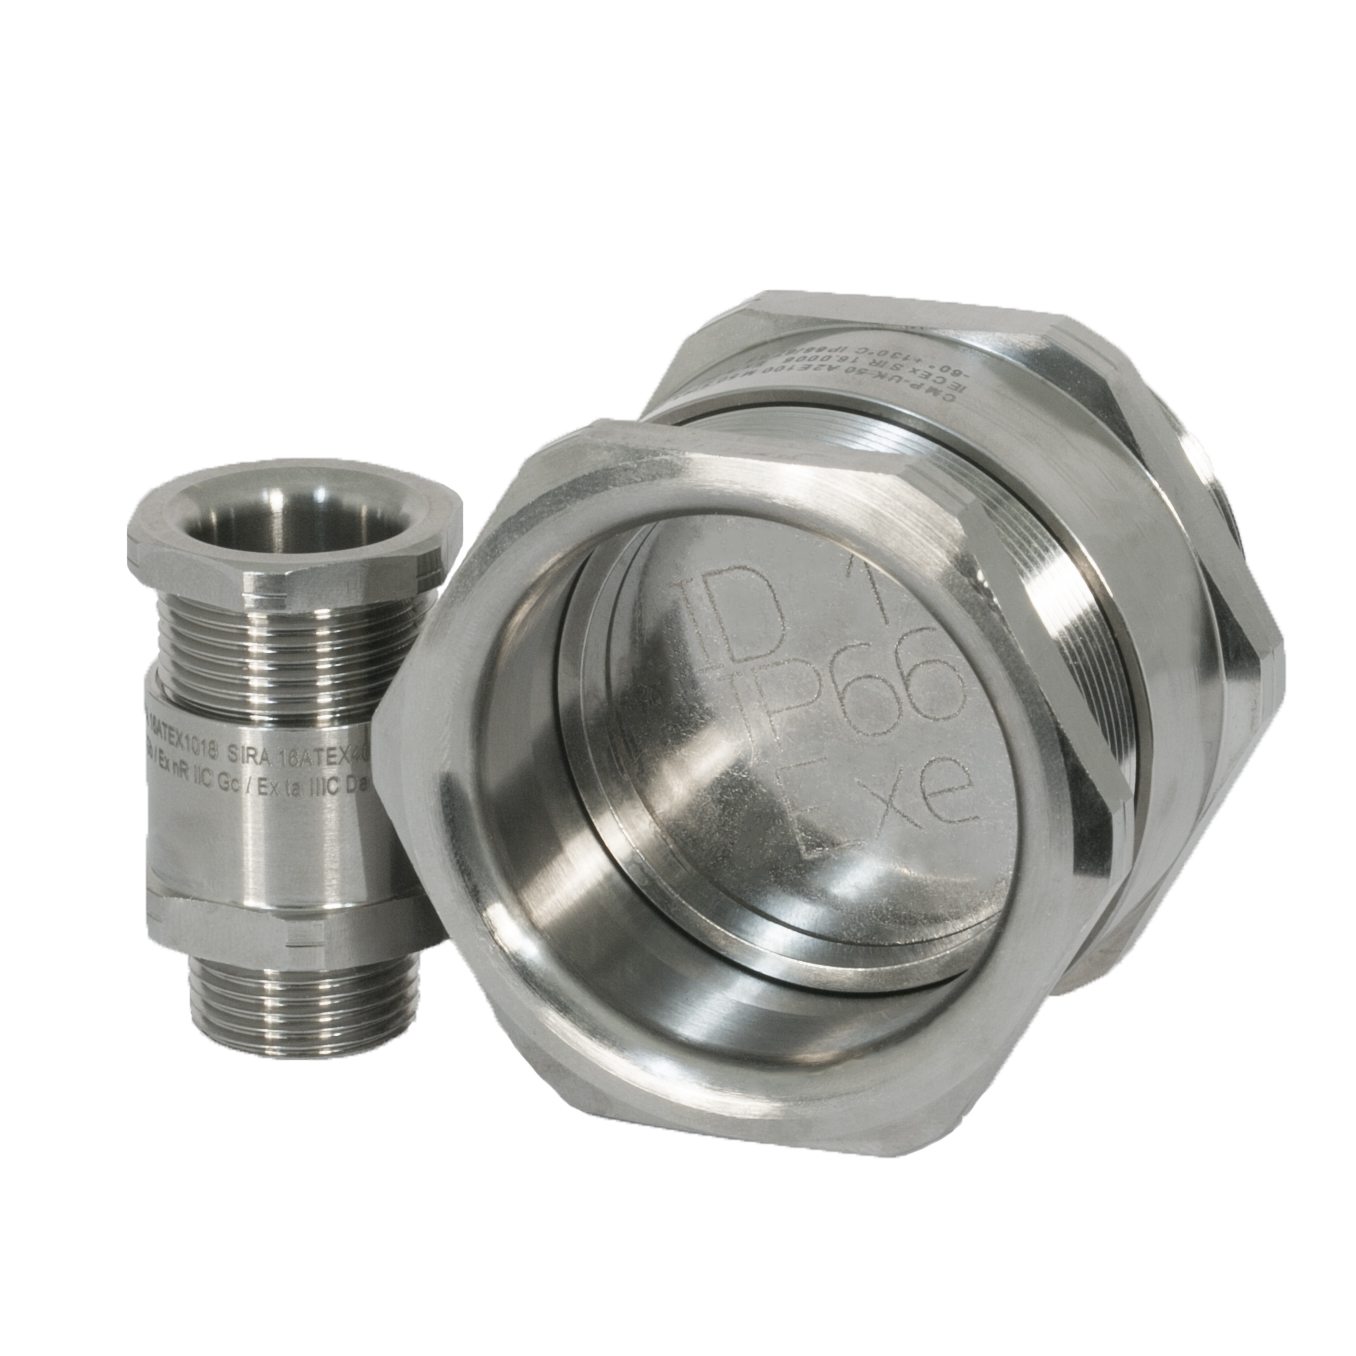 A-100 Series Cable Glands